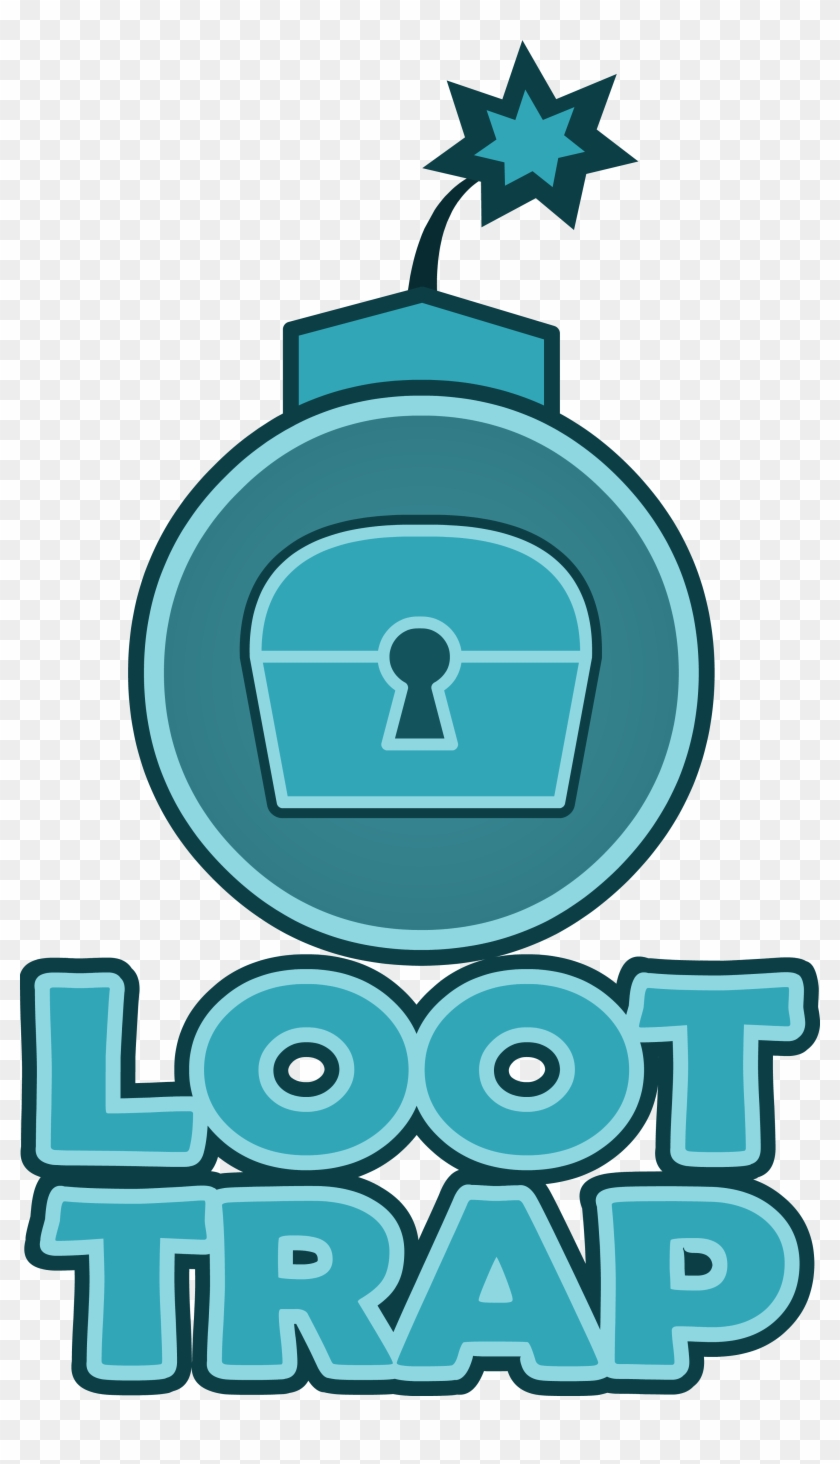 Loot Trap Overview - Loot Trap Overview #910291